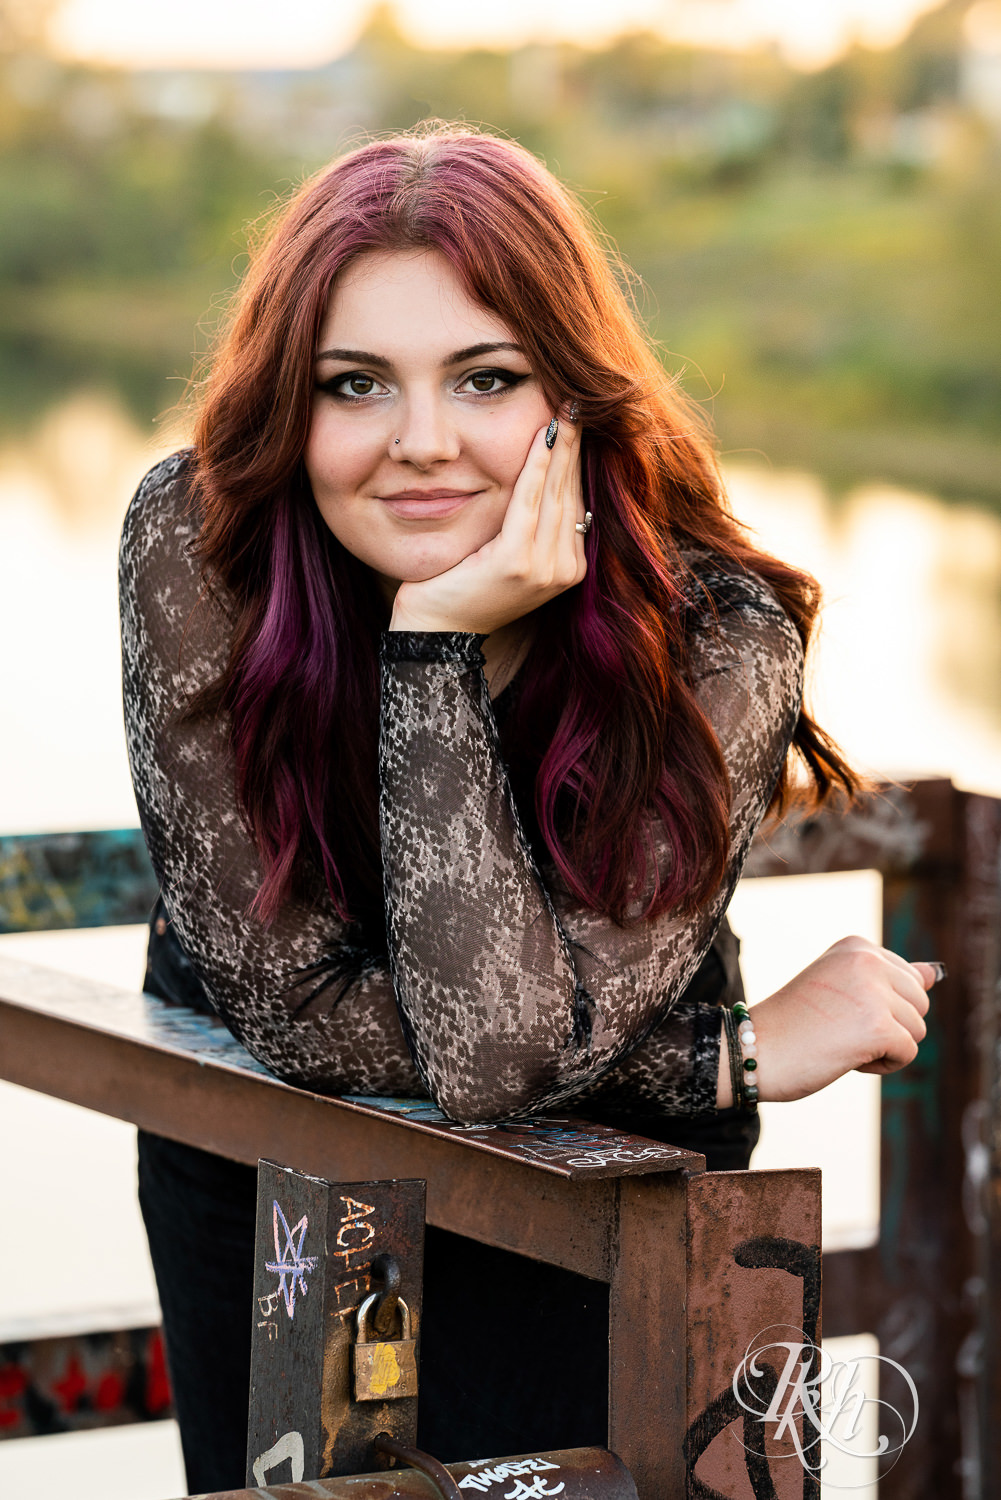 Senior girl with purple hair and chin in hand for her Northeast Minneapolis senior photography